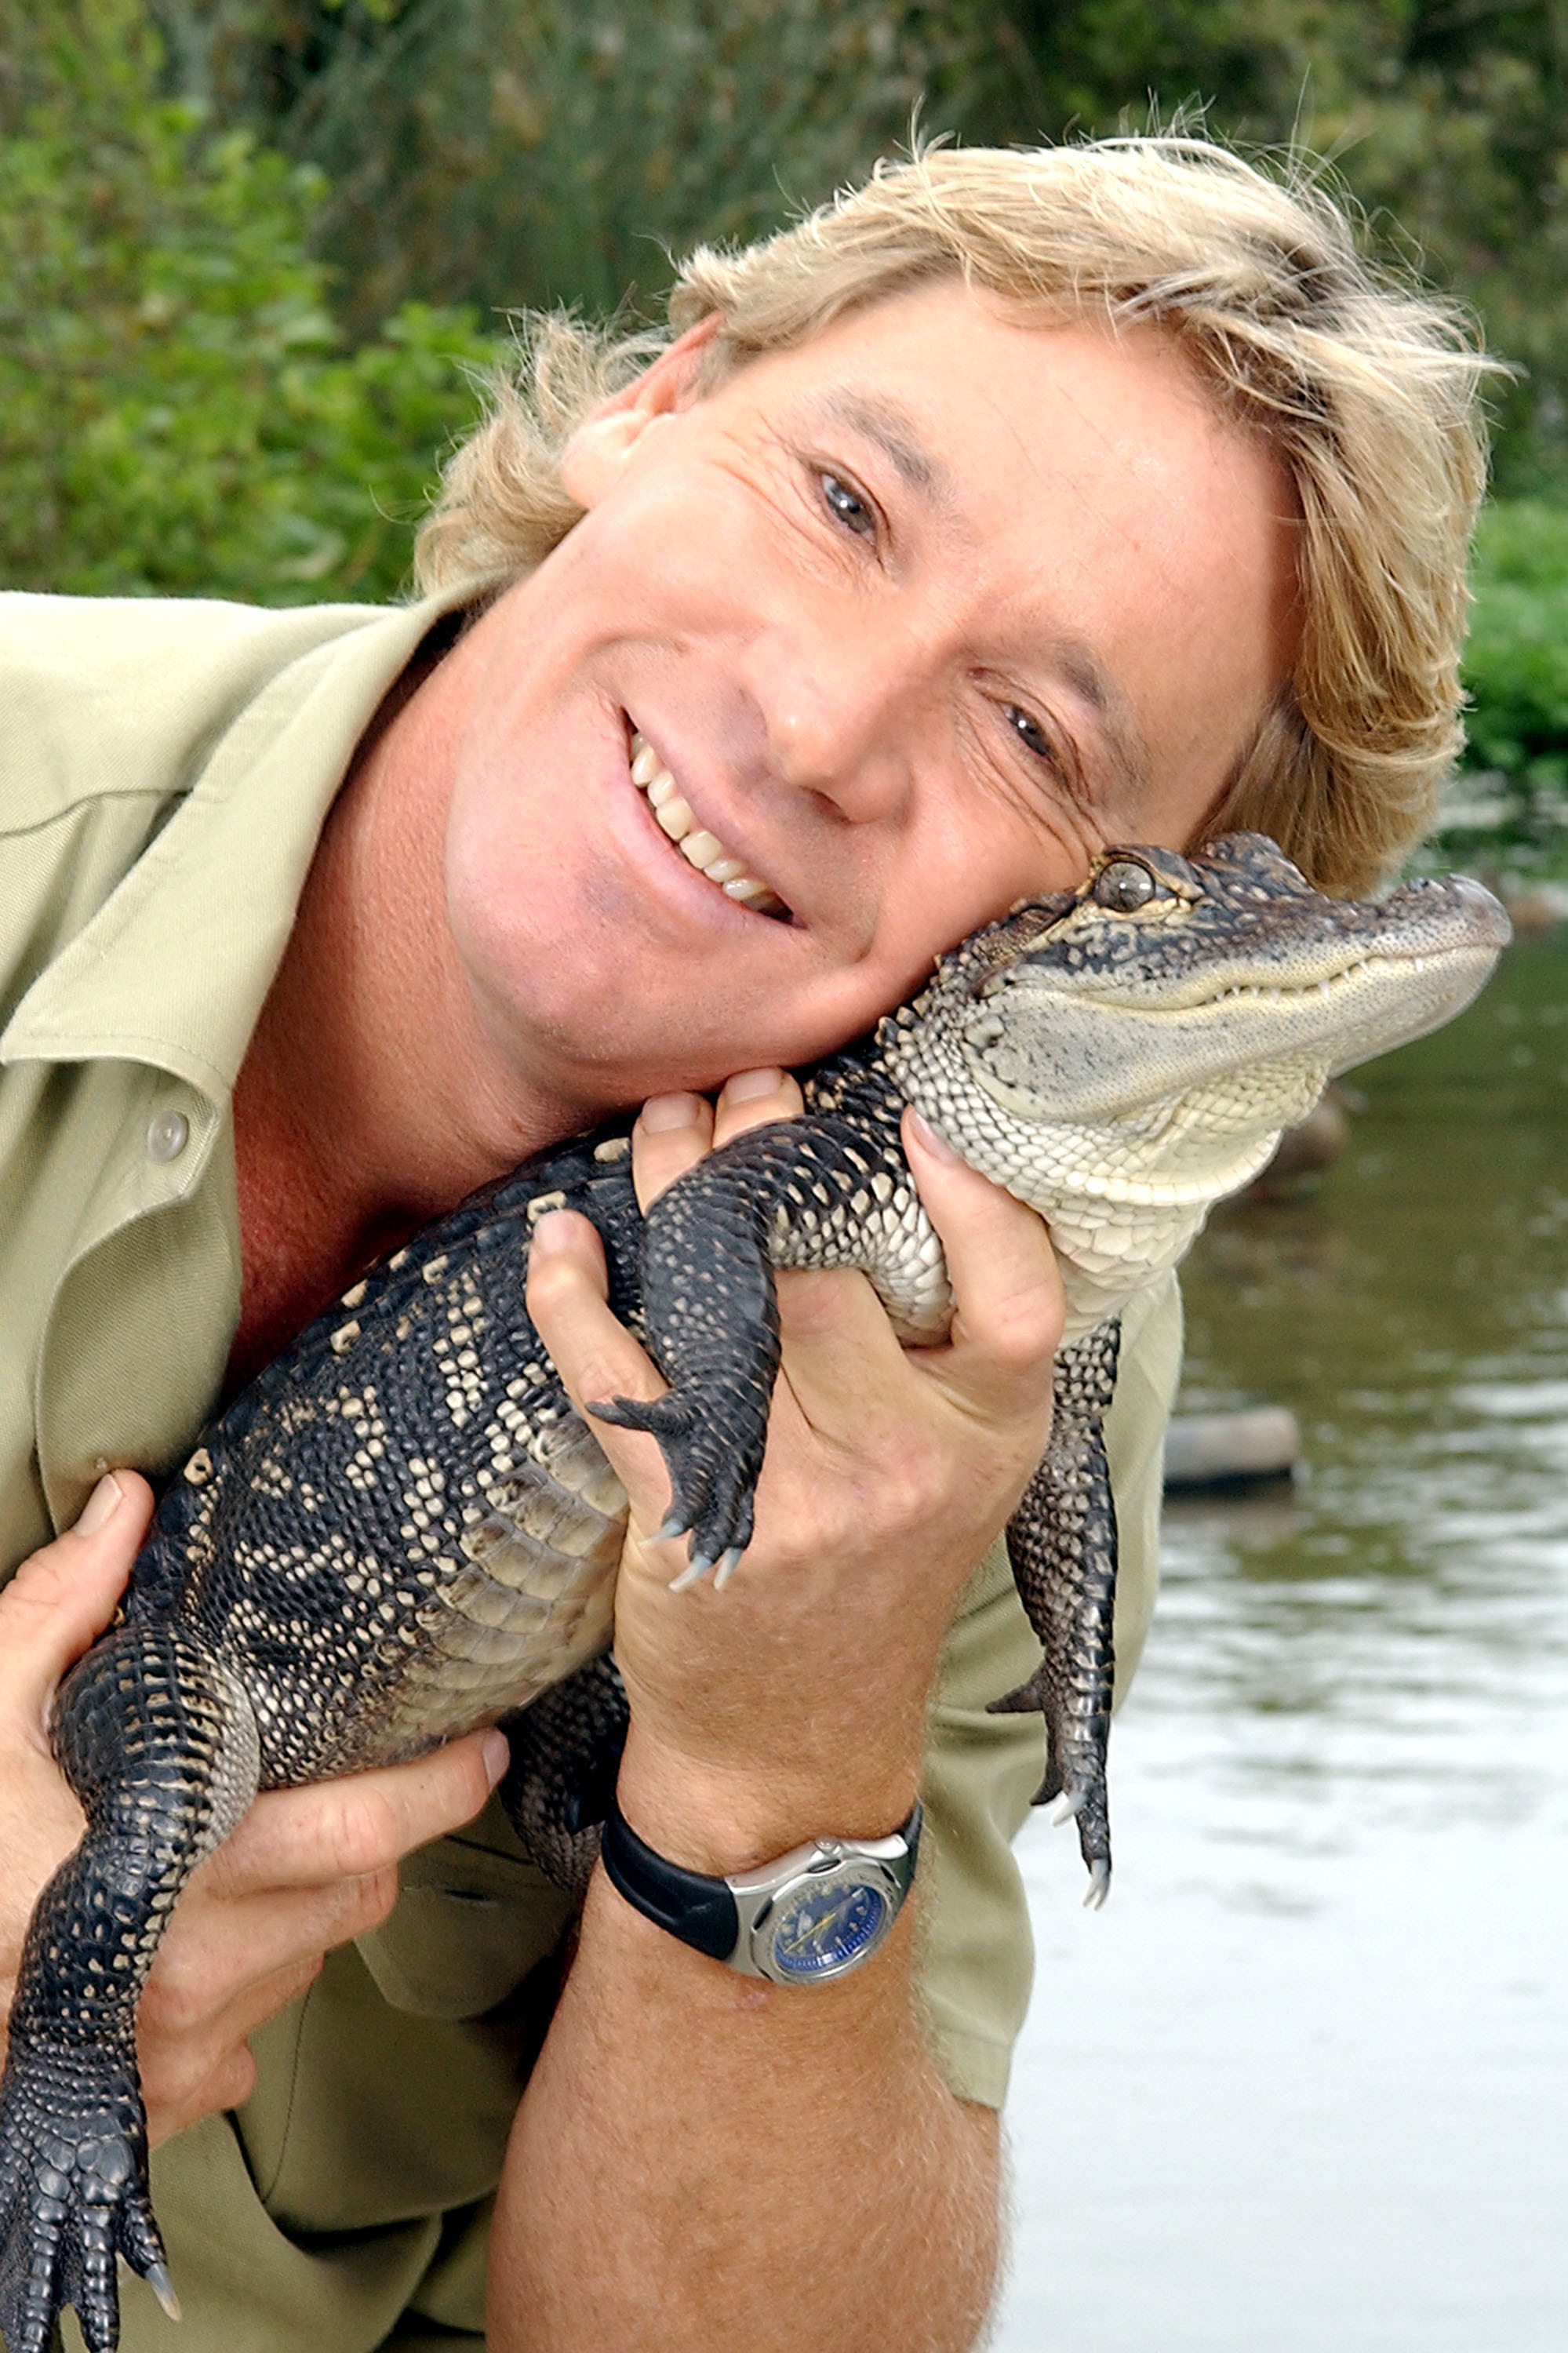 Steve Irwin holds a small alligator up to his face while smiling in front of a body of water.